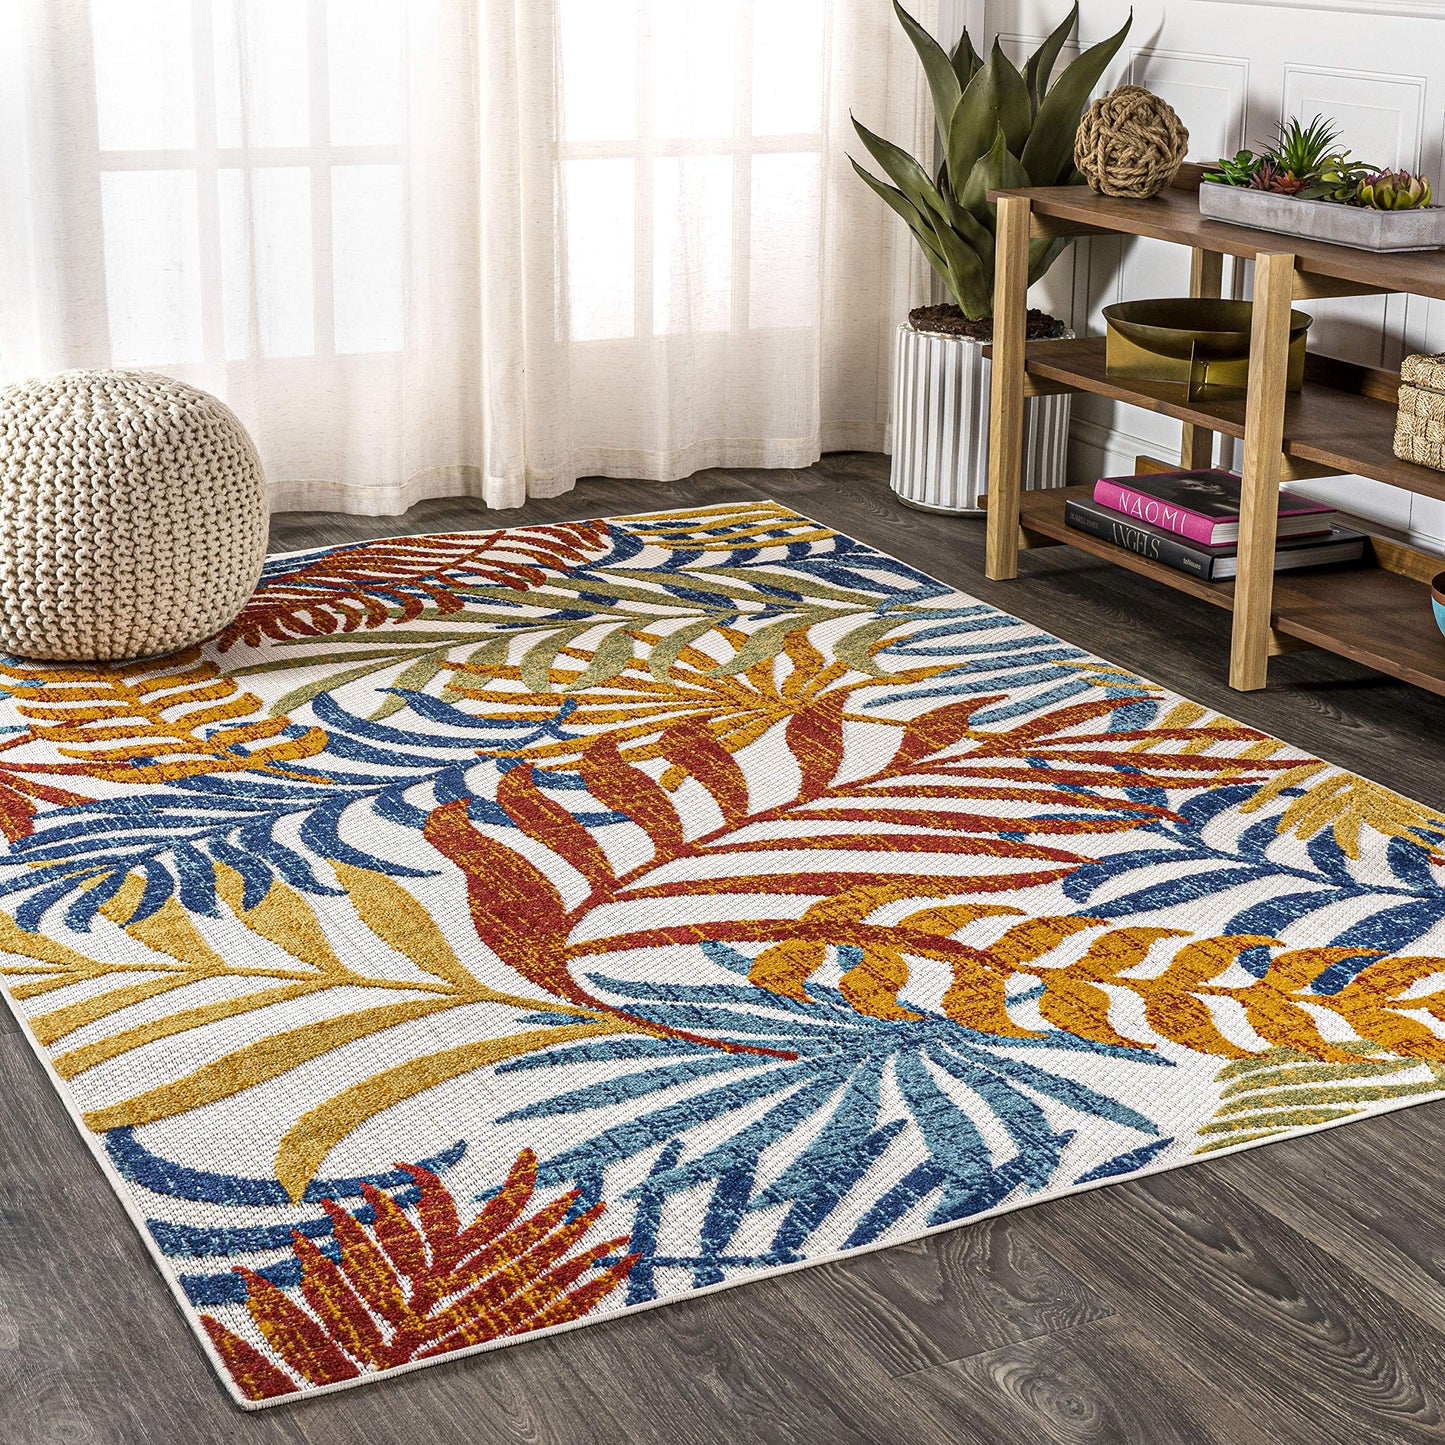 JONATHAN Y AMC100B-8 Tropics Palm Leaves Indoor Outdoor Area-Rug Bohemian Floral Easy-Cleaning High Traffic Bedroom Kitchen Backyard Patio Porch Non Shedding, 8 X 10, Cream/Orange